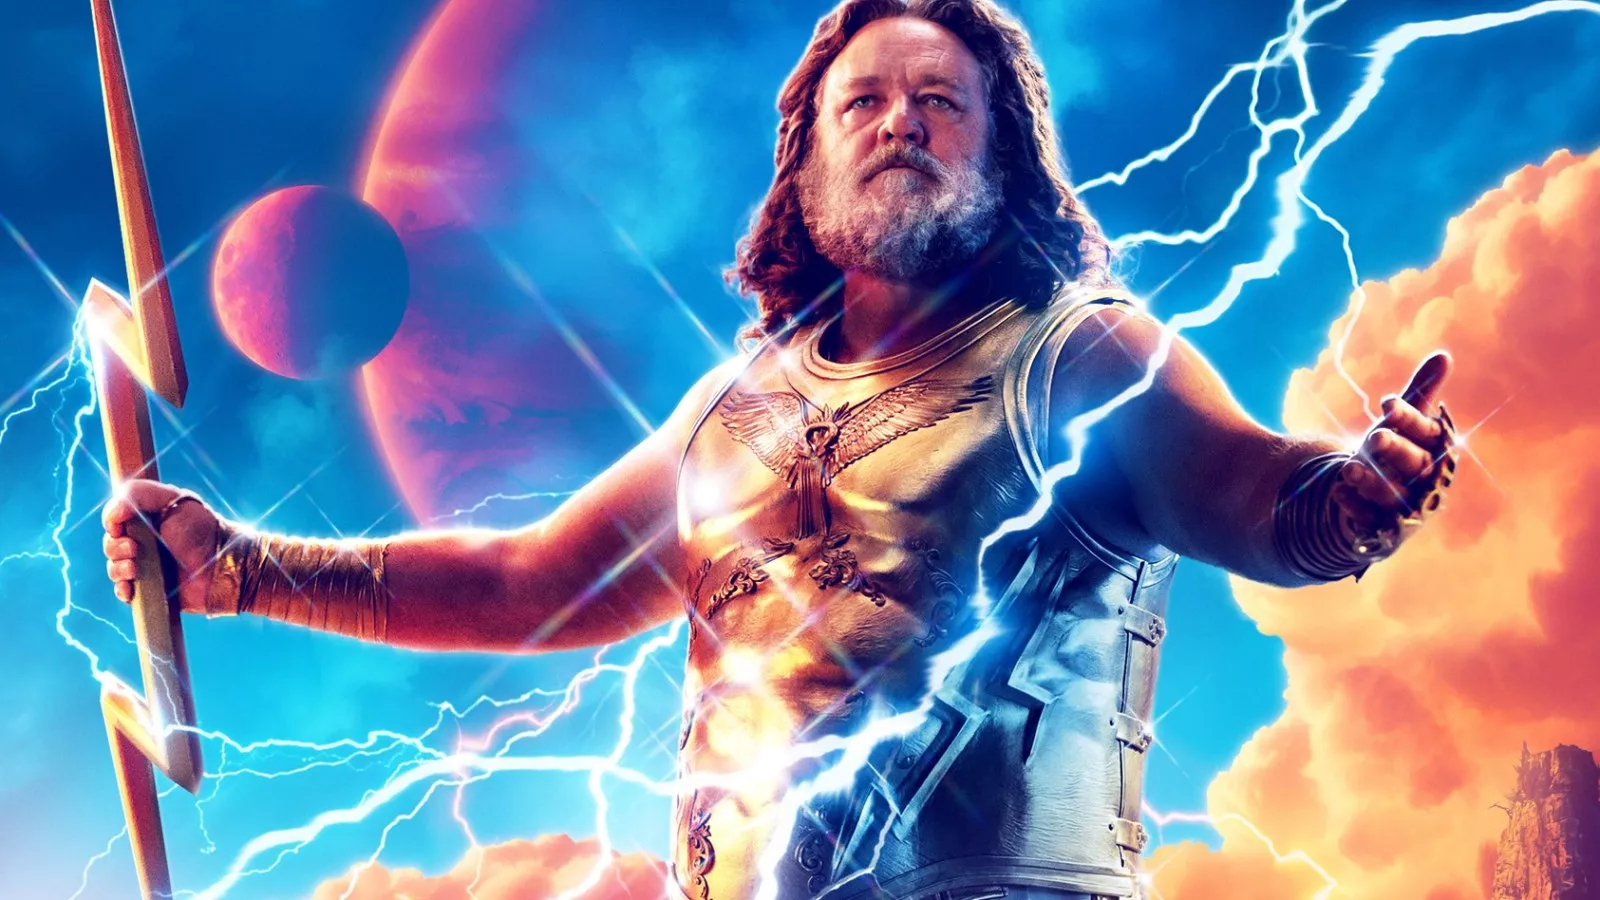 Thor: Love and Thunder' Post-Credit Scenes Explained: Who Plays